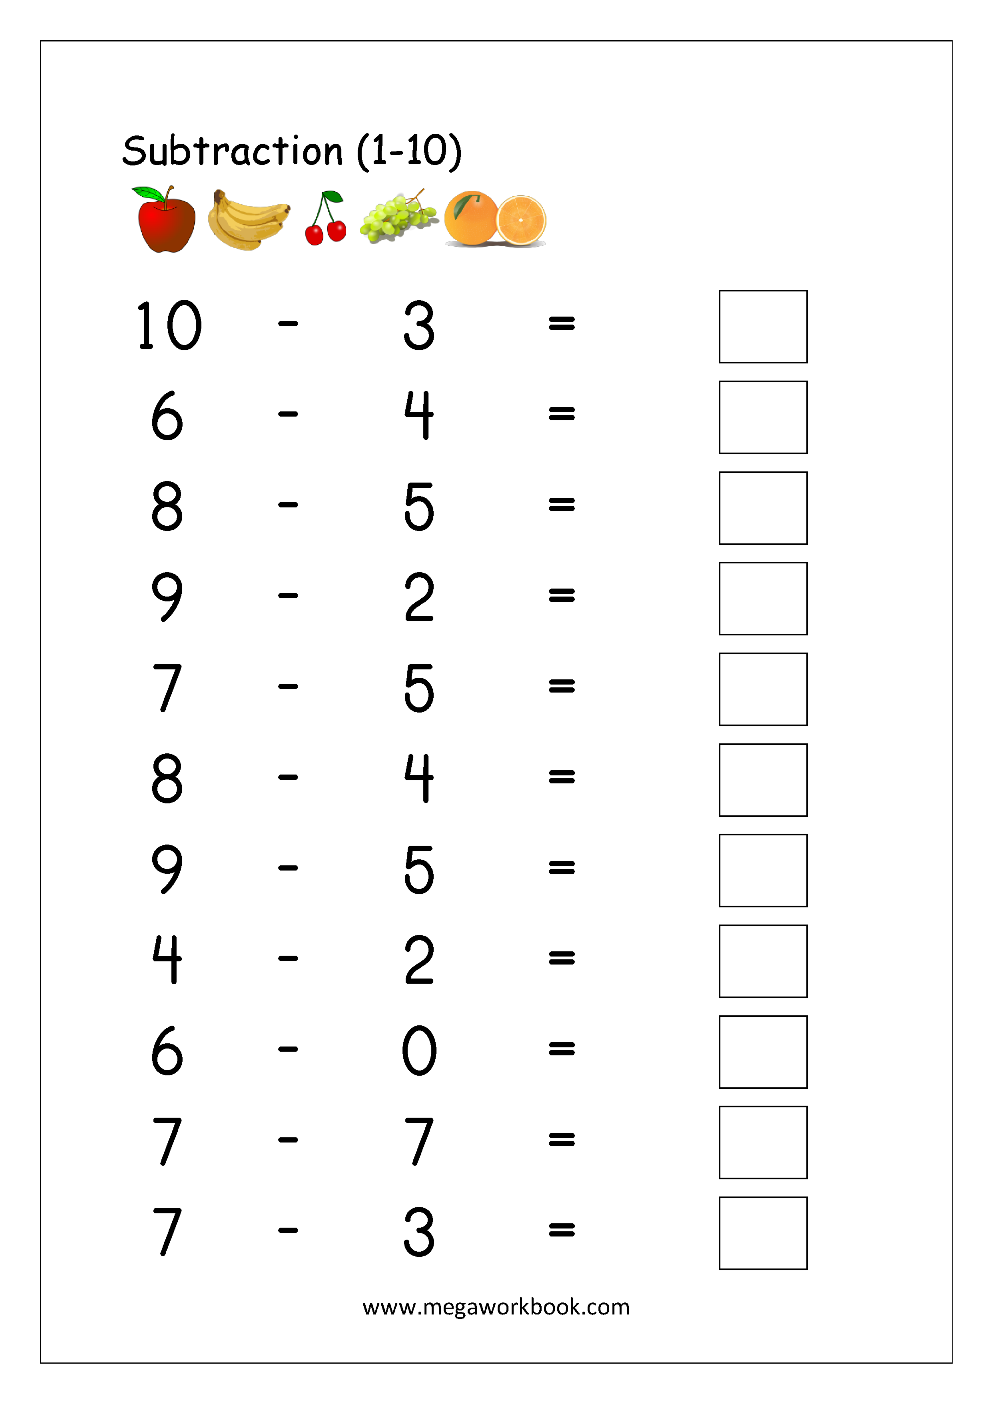 3rd-grade-addition-and-subtraction-problems-kidsworksheetfun